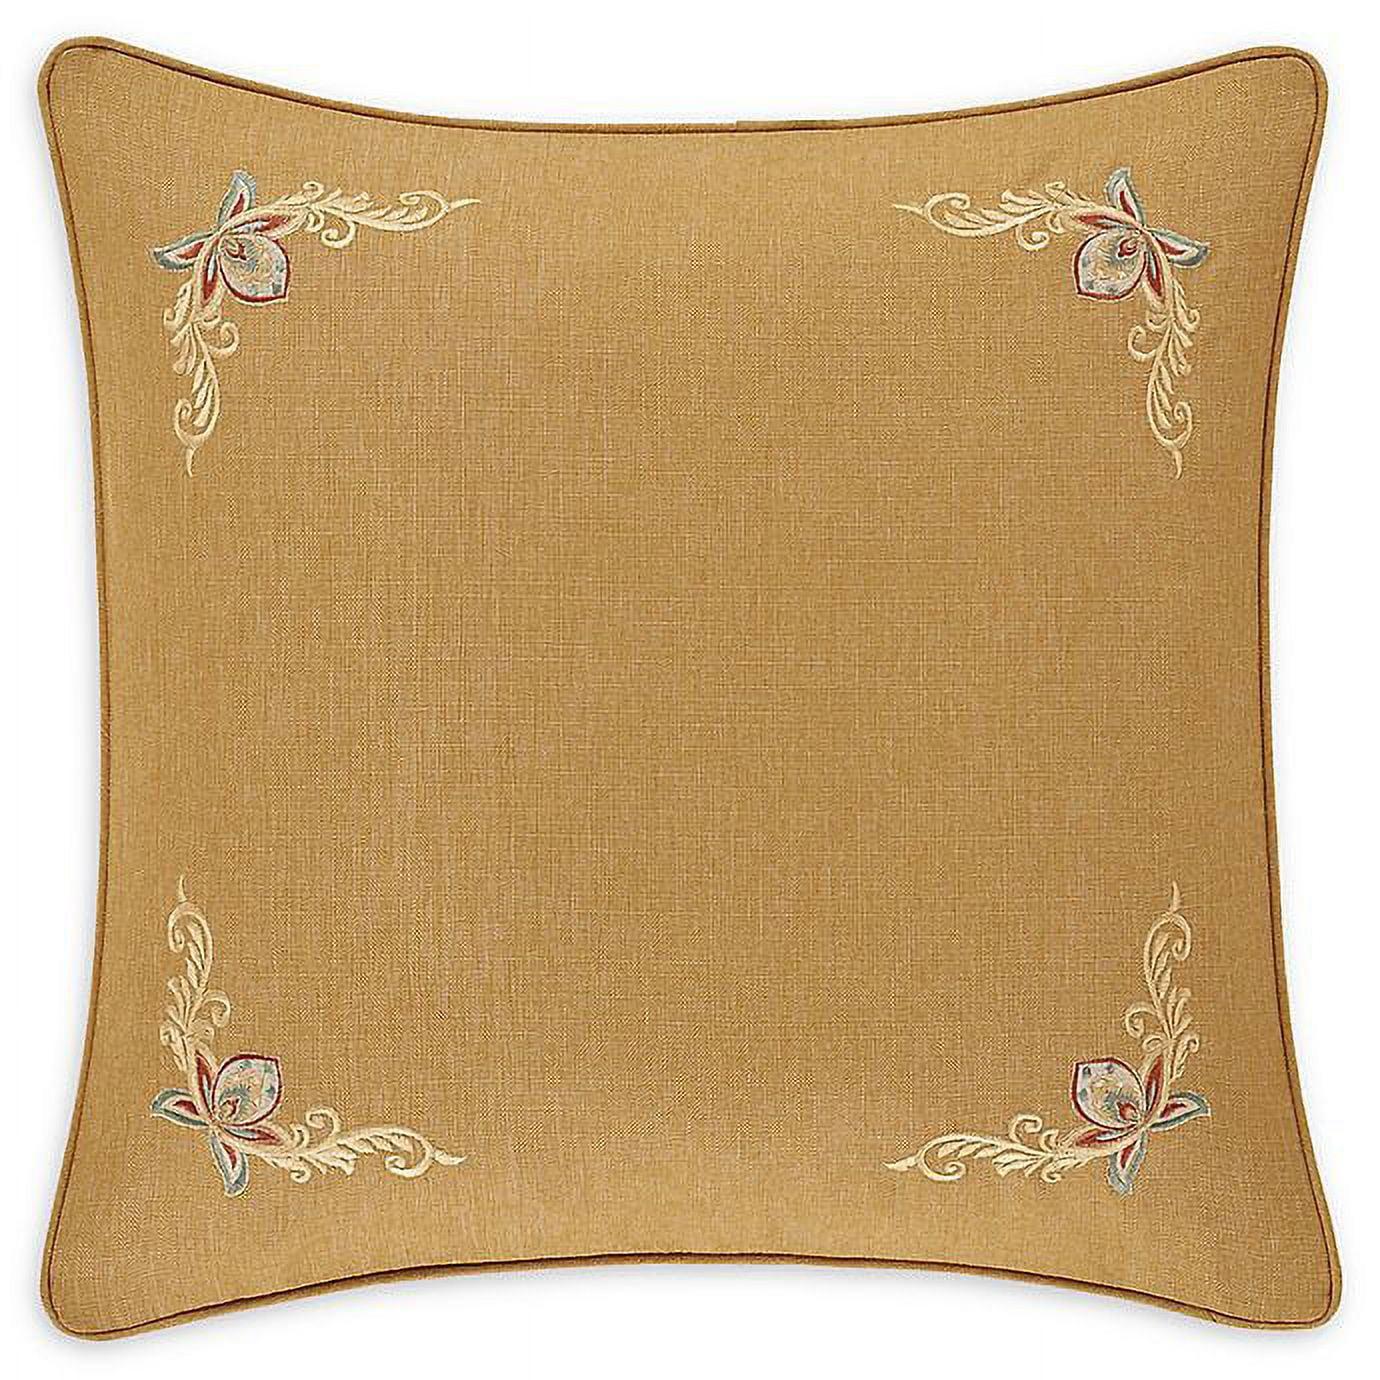 Gold Embroidered Euro Sham with Floral Design